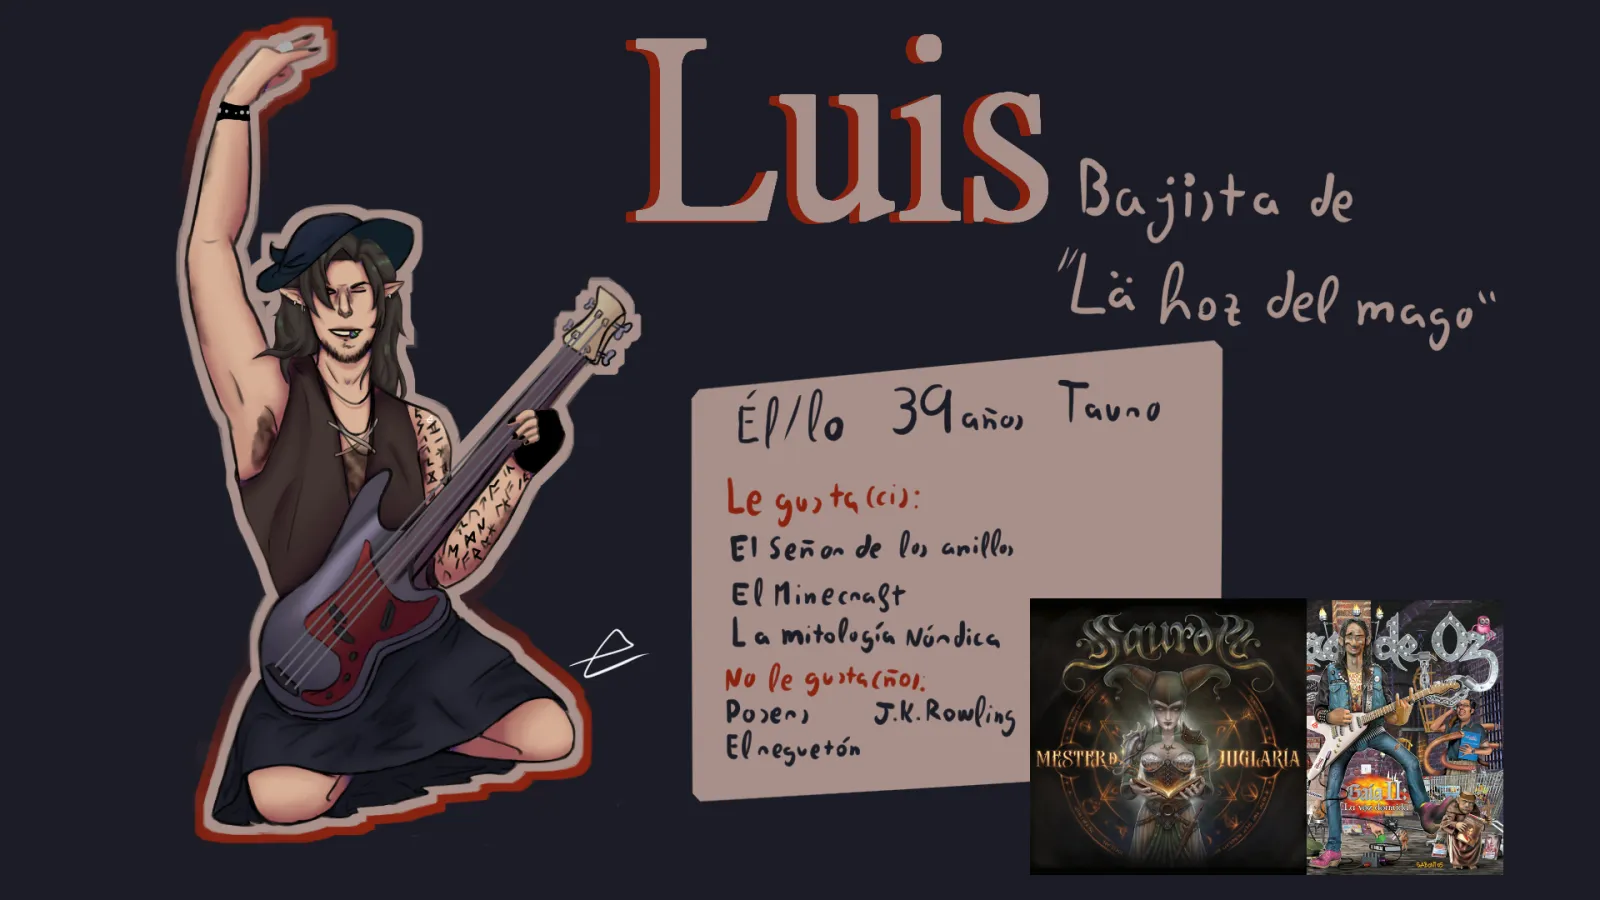 Final draw of Luis, a guitarrist, and a brief description of him and his personality